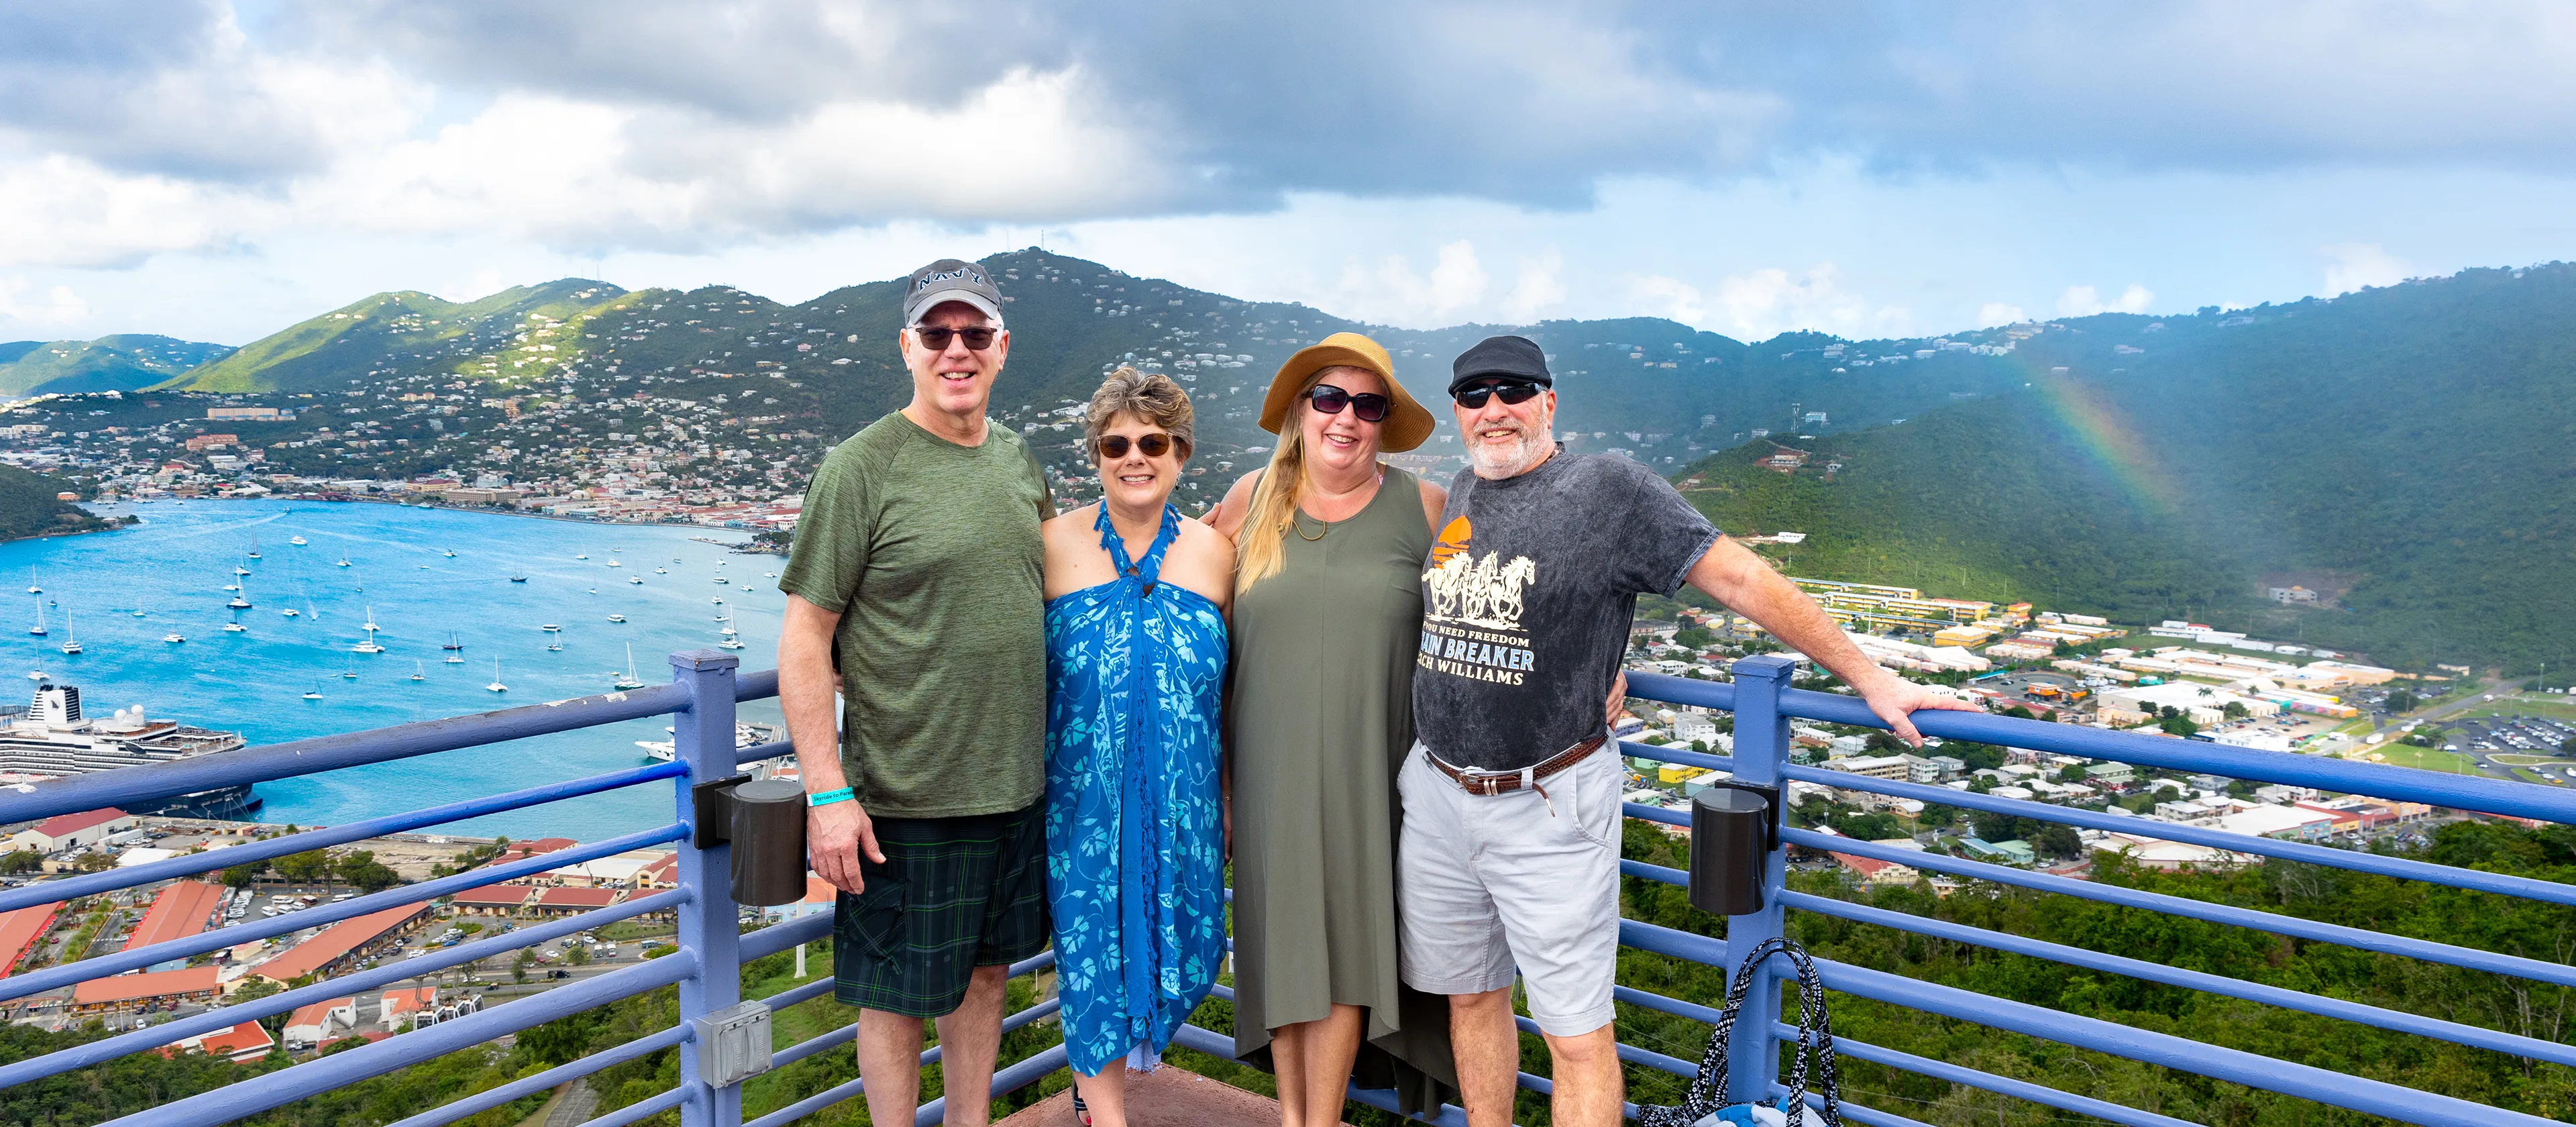 Travelers standing together overlooking St Thomas